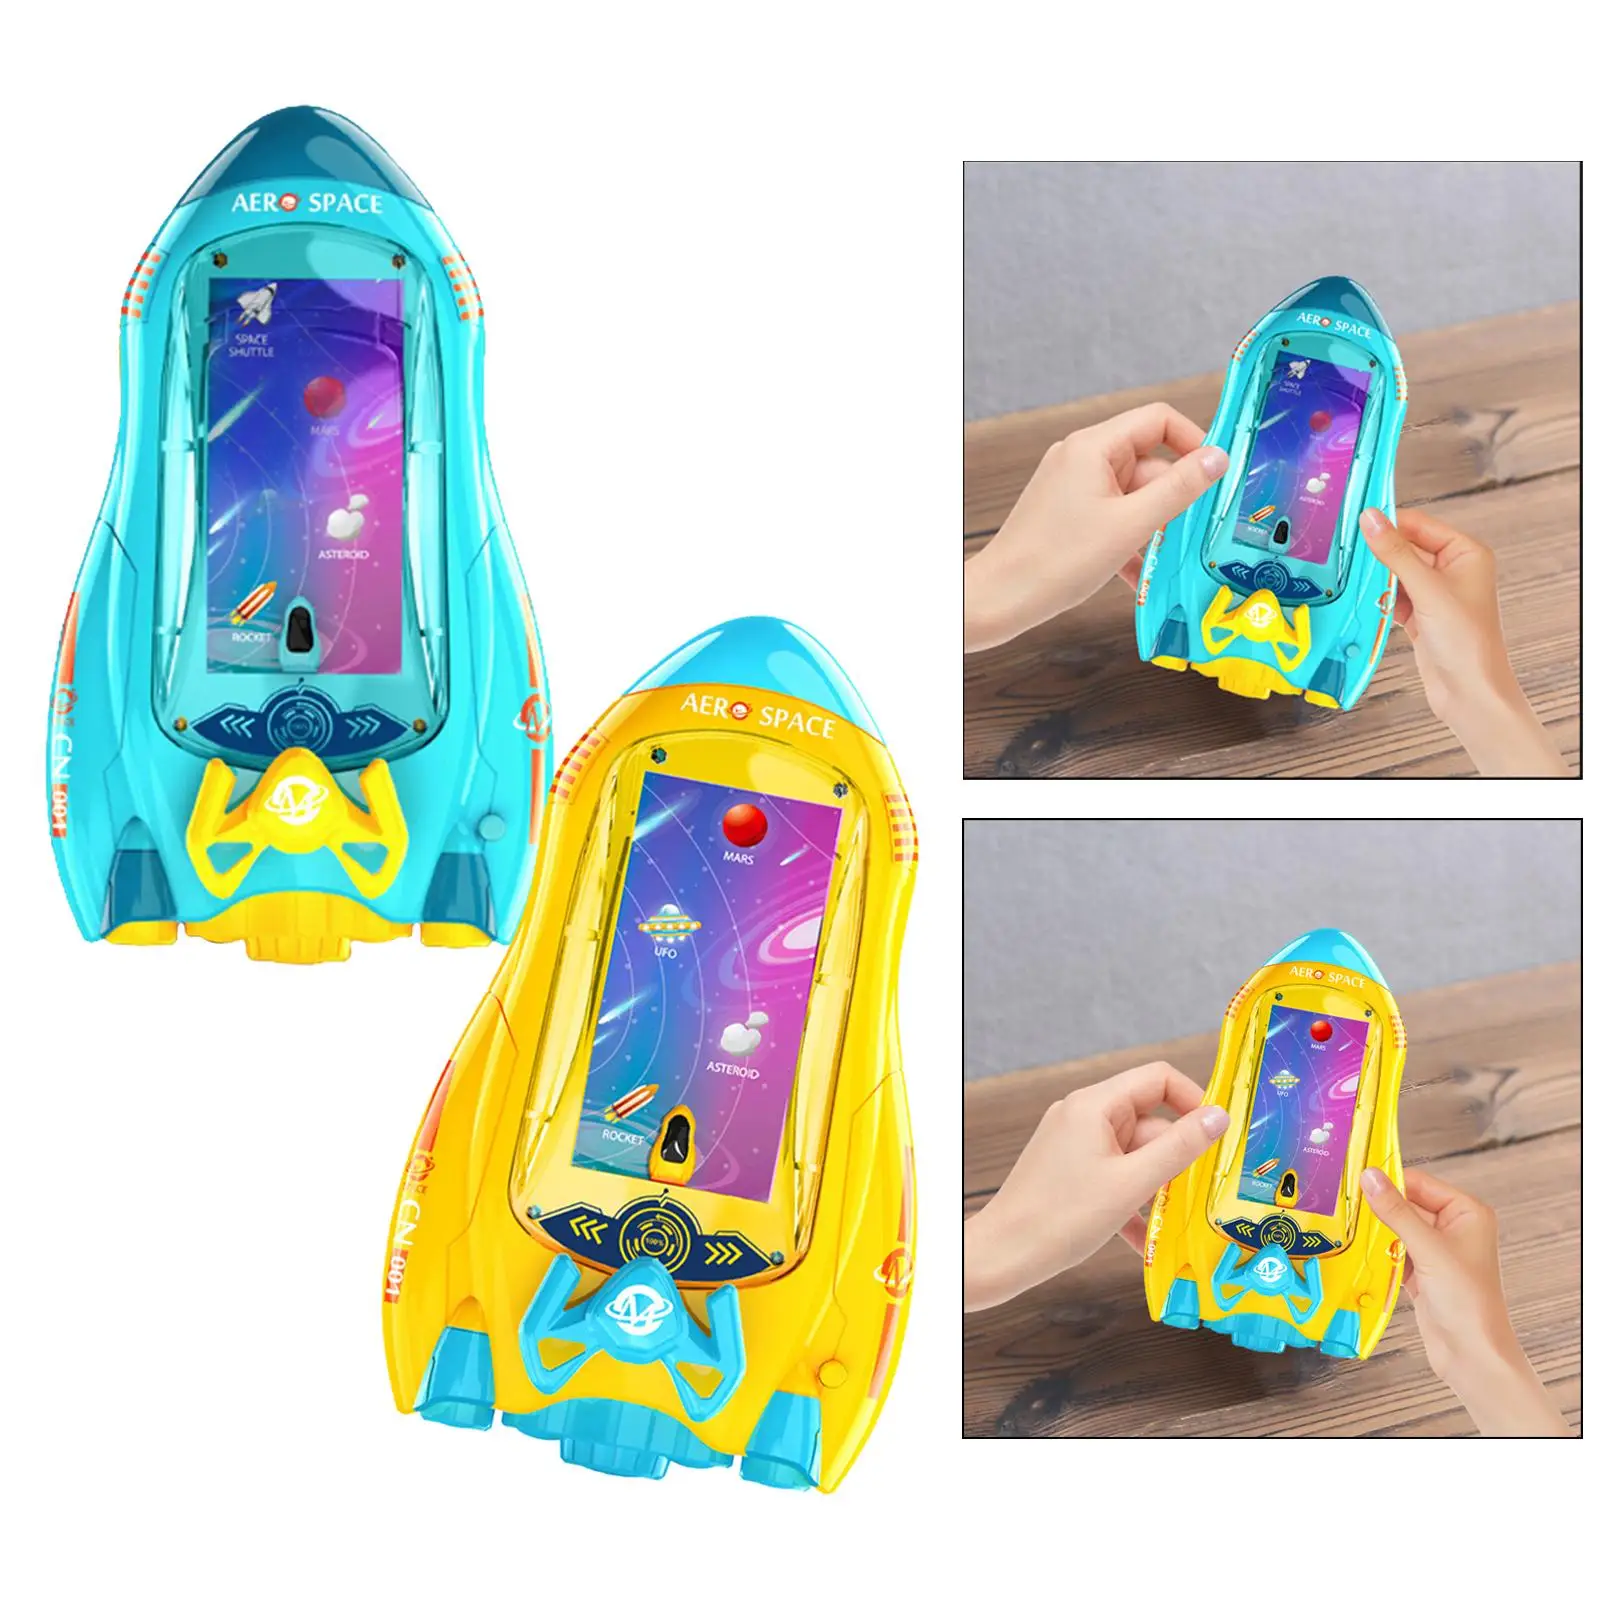 Space Adventure Musical Steering Wheel Toy Early Education Toy with Music Light Interactive for Children Birthday Gifts